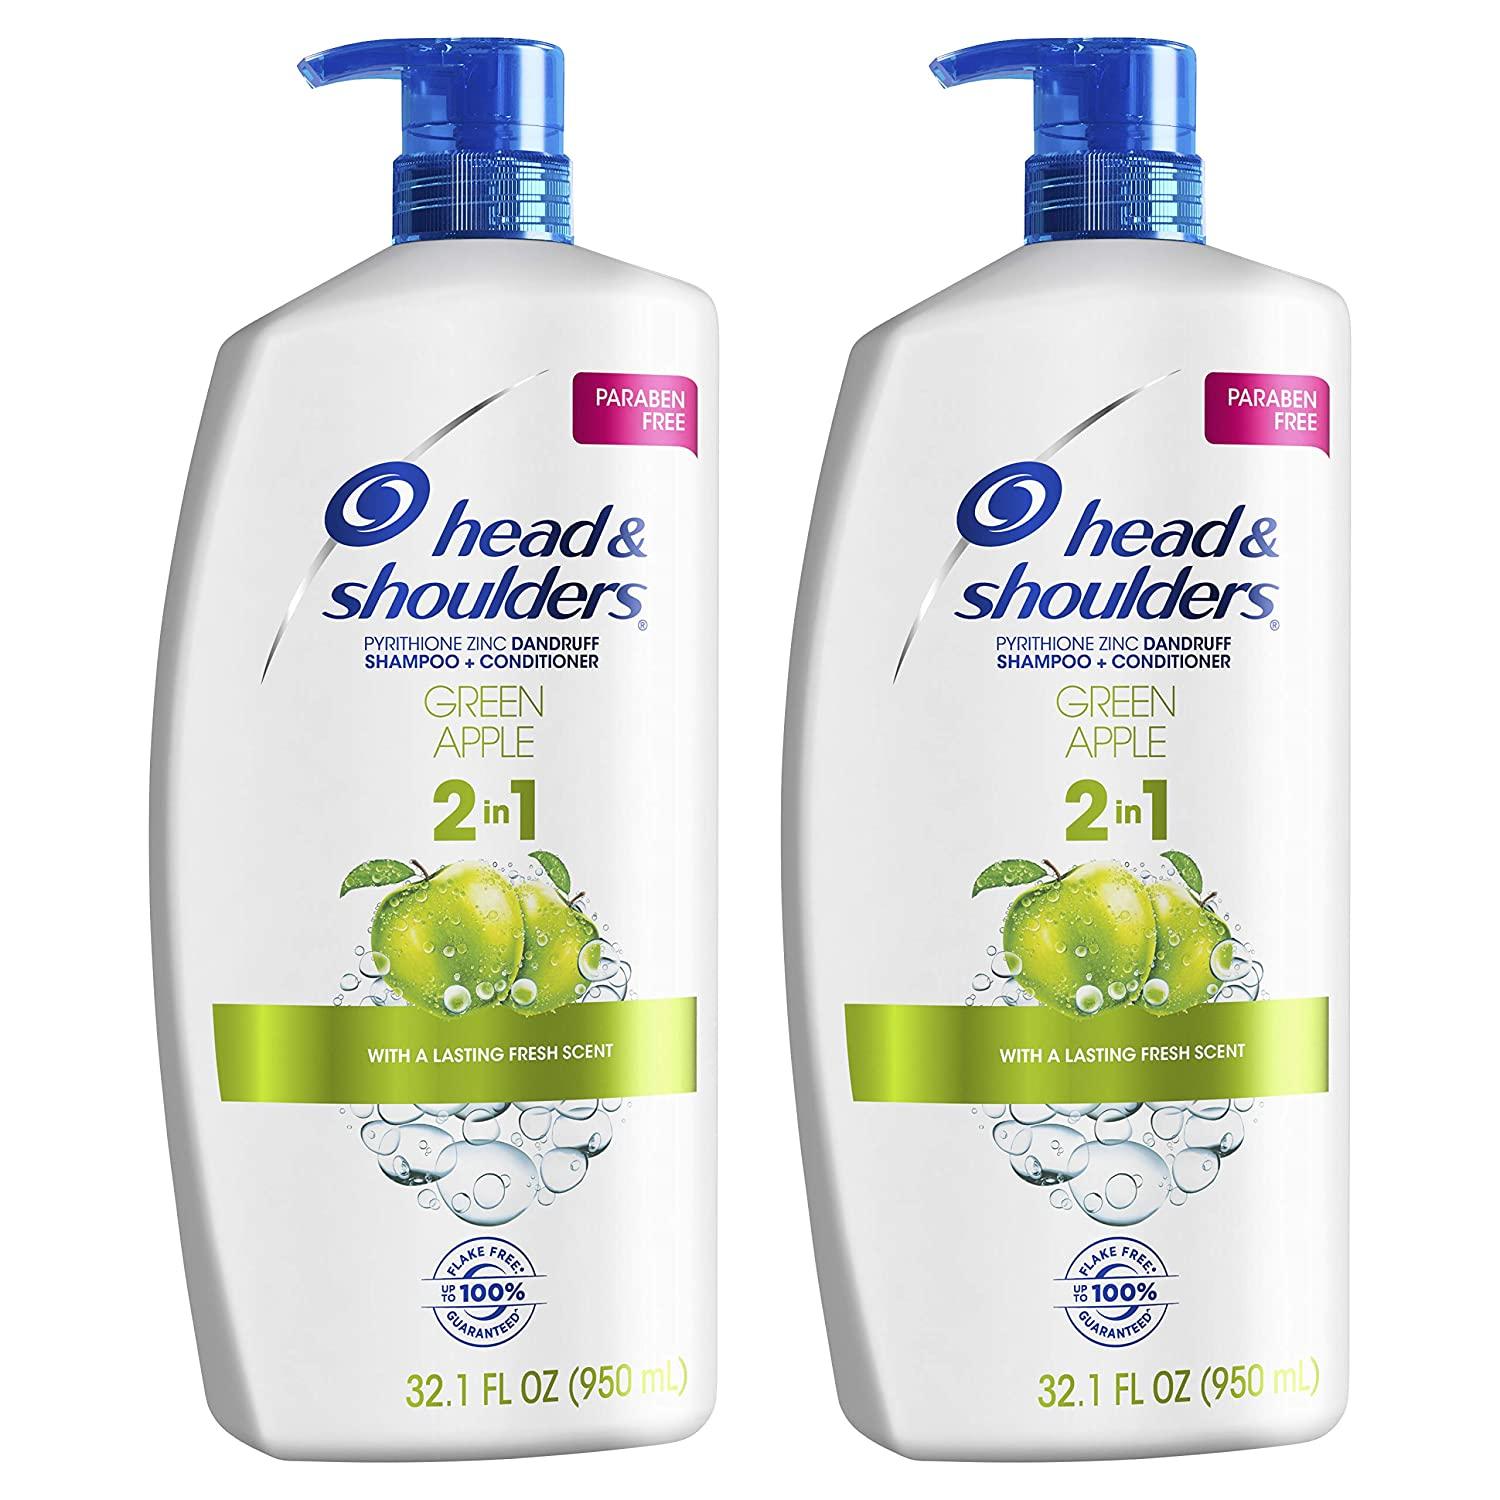 2 Head and Shoulders 2 in 1 Anti Dandruff Shampoo for $12.65 Shipped